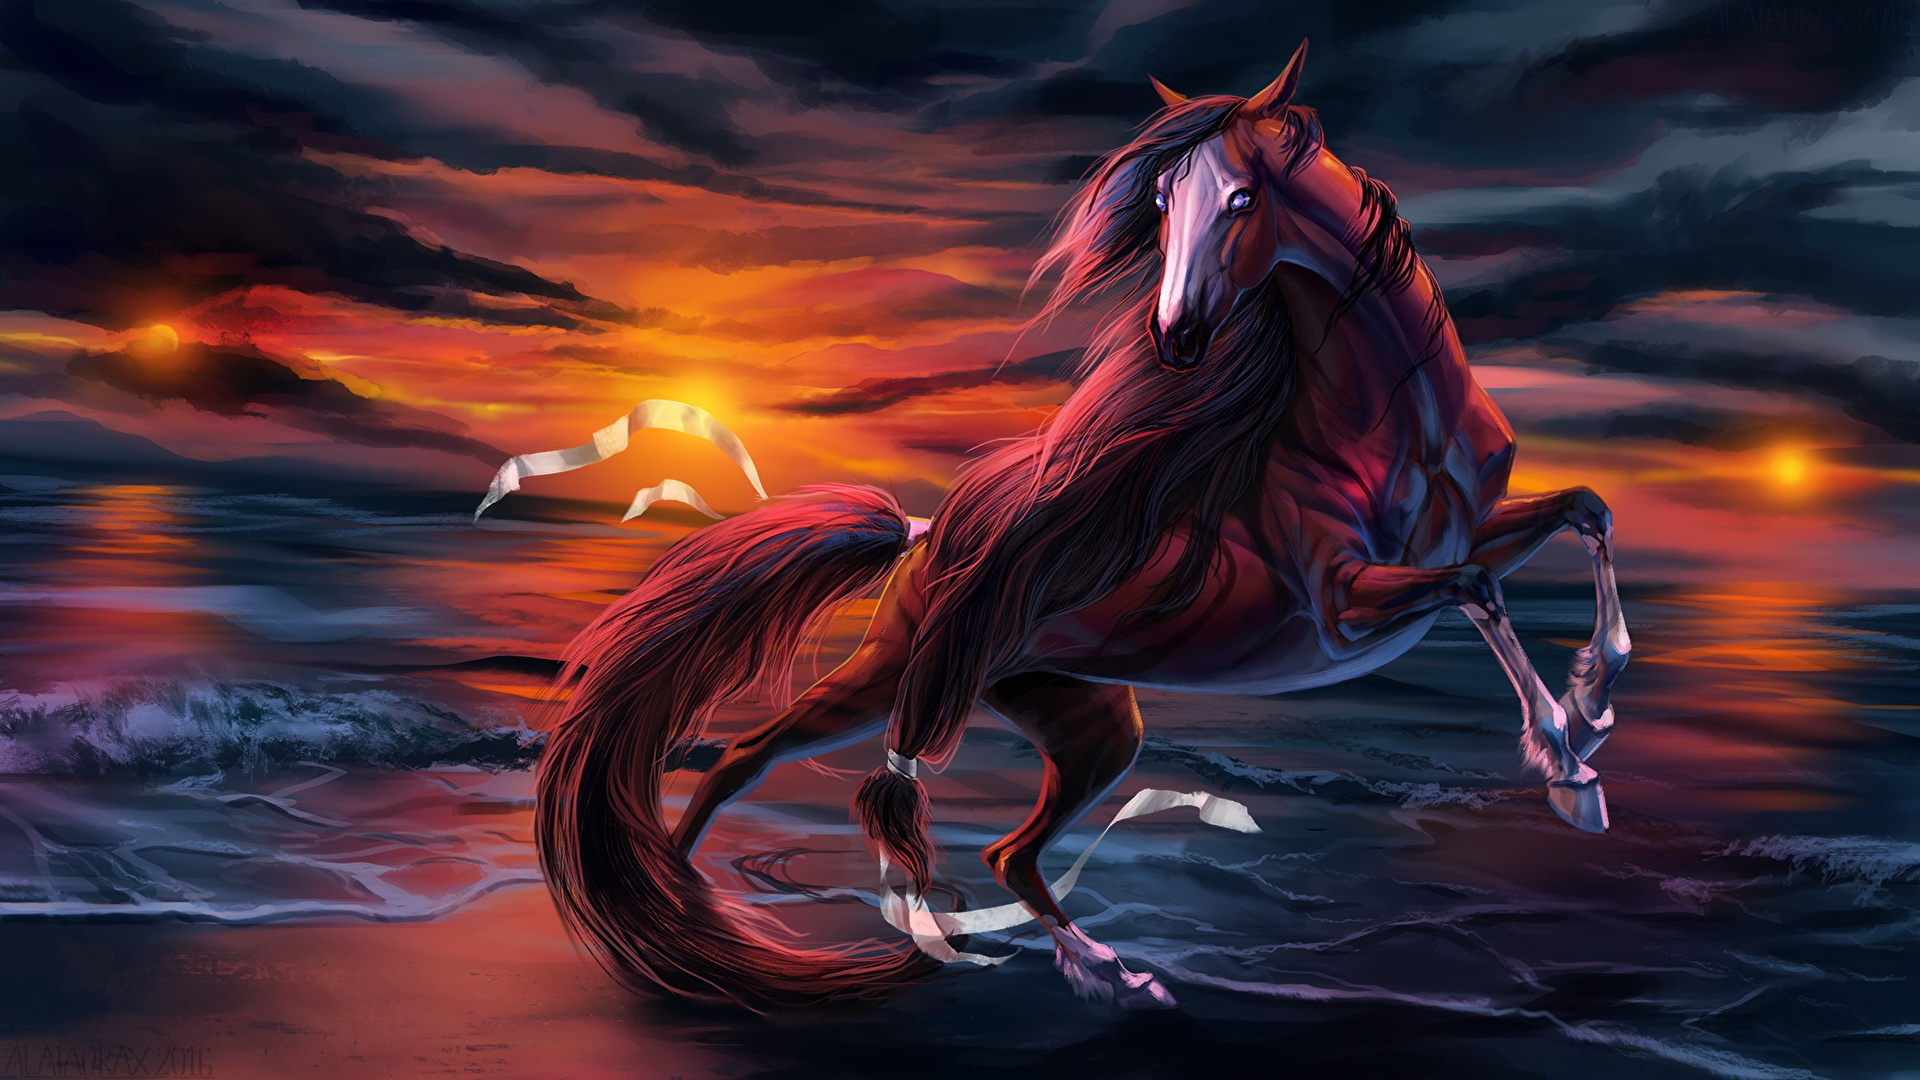 The Fantasy Horse In The Forest Background Mythical Creatures Picture  Background Image And Wallpaper for Free Download